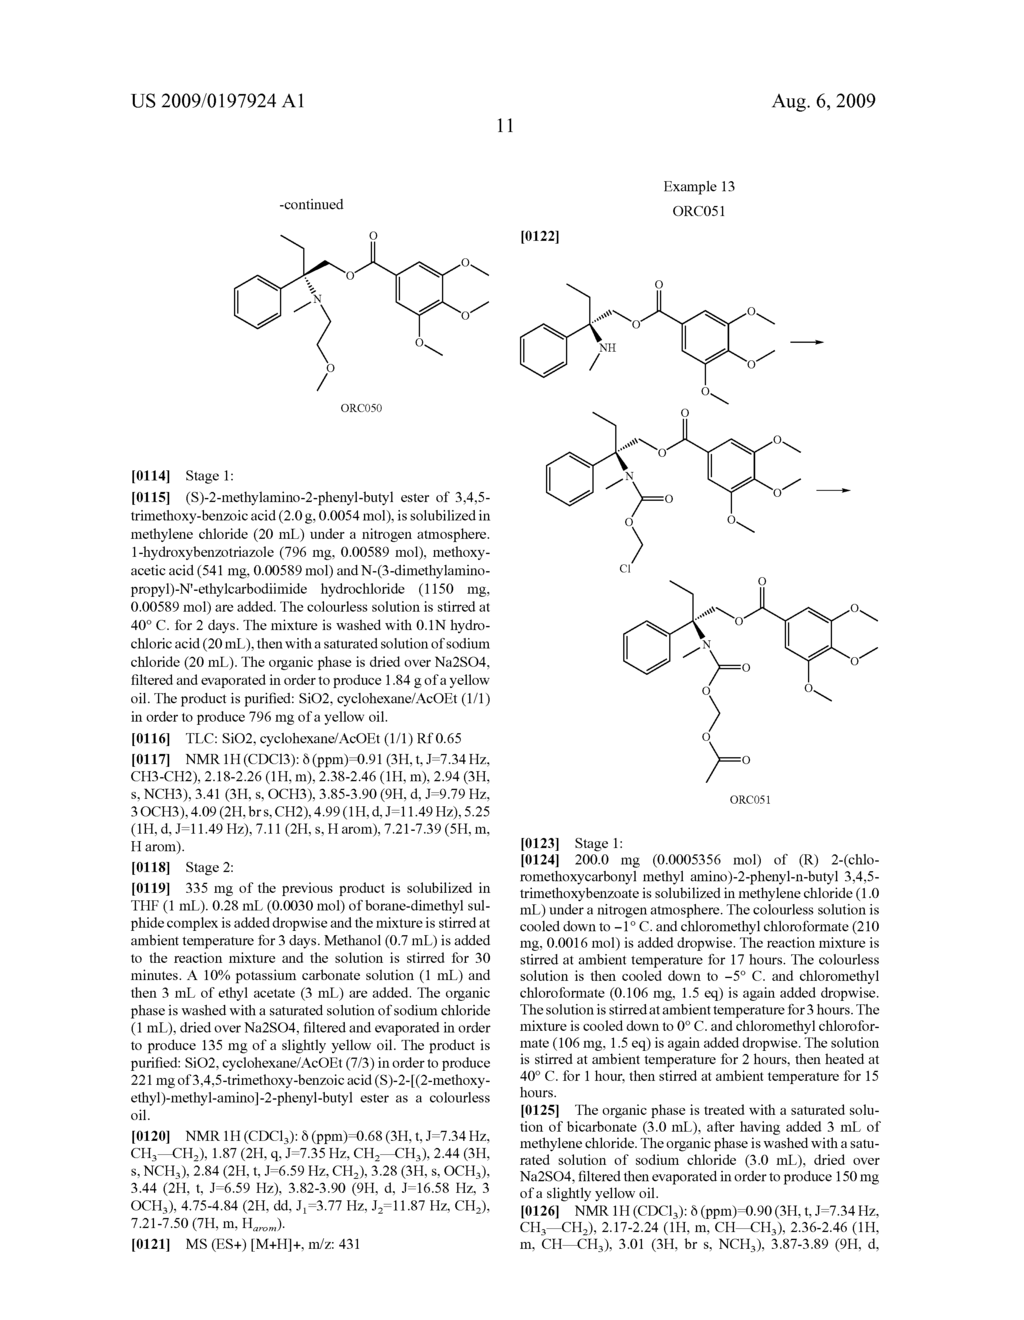 2-AMINO-2-PHENYL-ALKANOL DERIVATIVES, THEIR PREPARATION AND PHARMACEUTICAL COMPOSITIONS CONTAINING THEM - diagram, schematic, and image 12